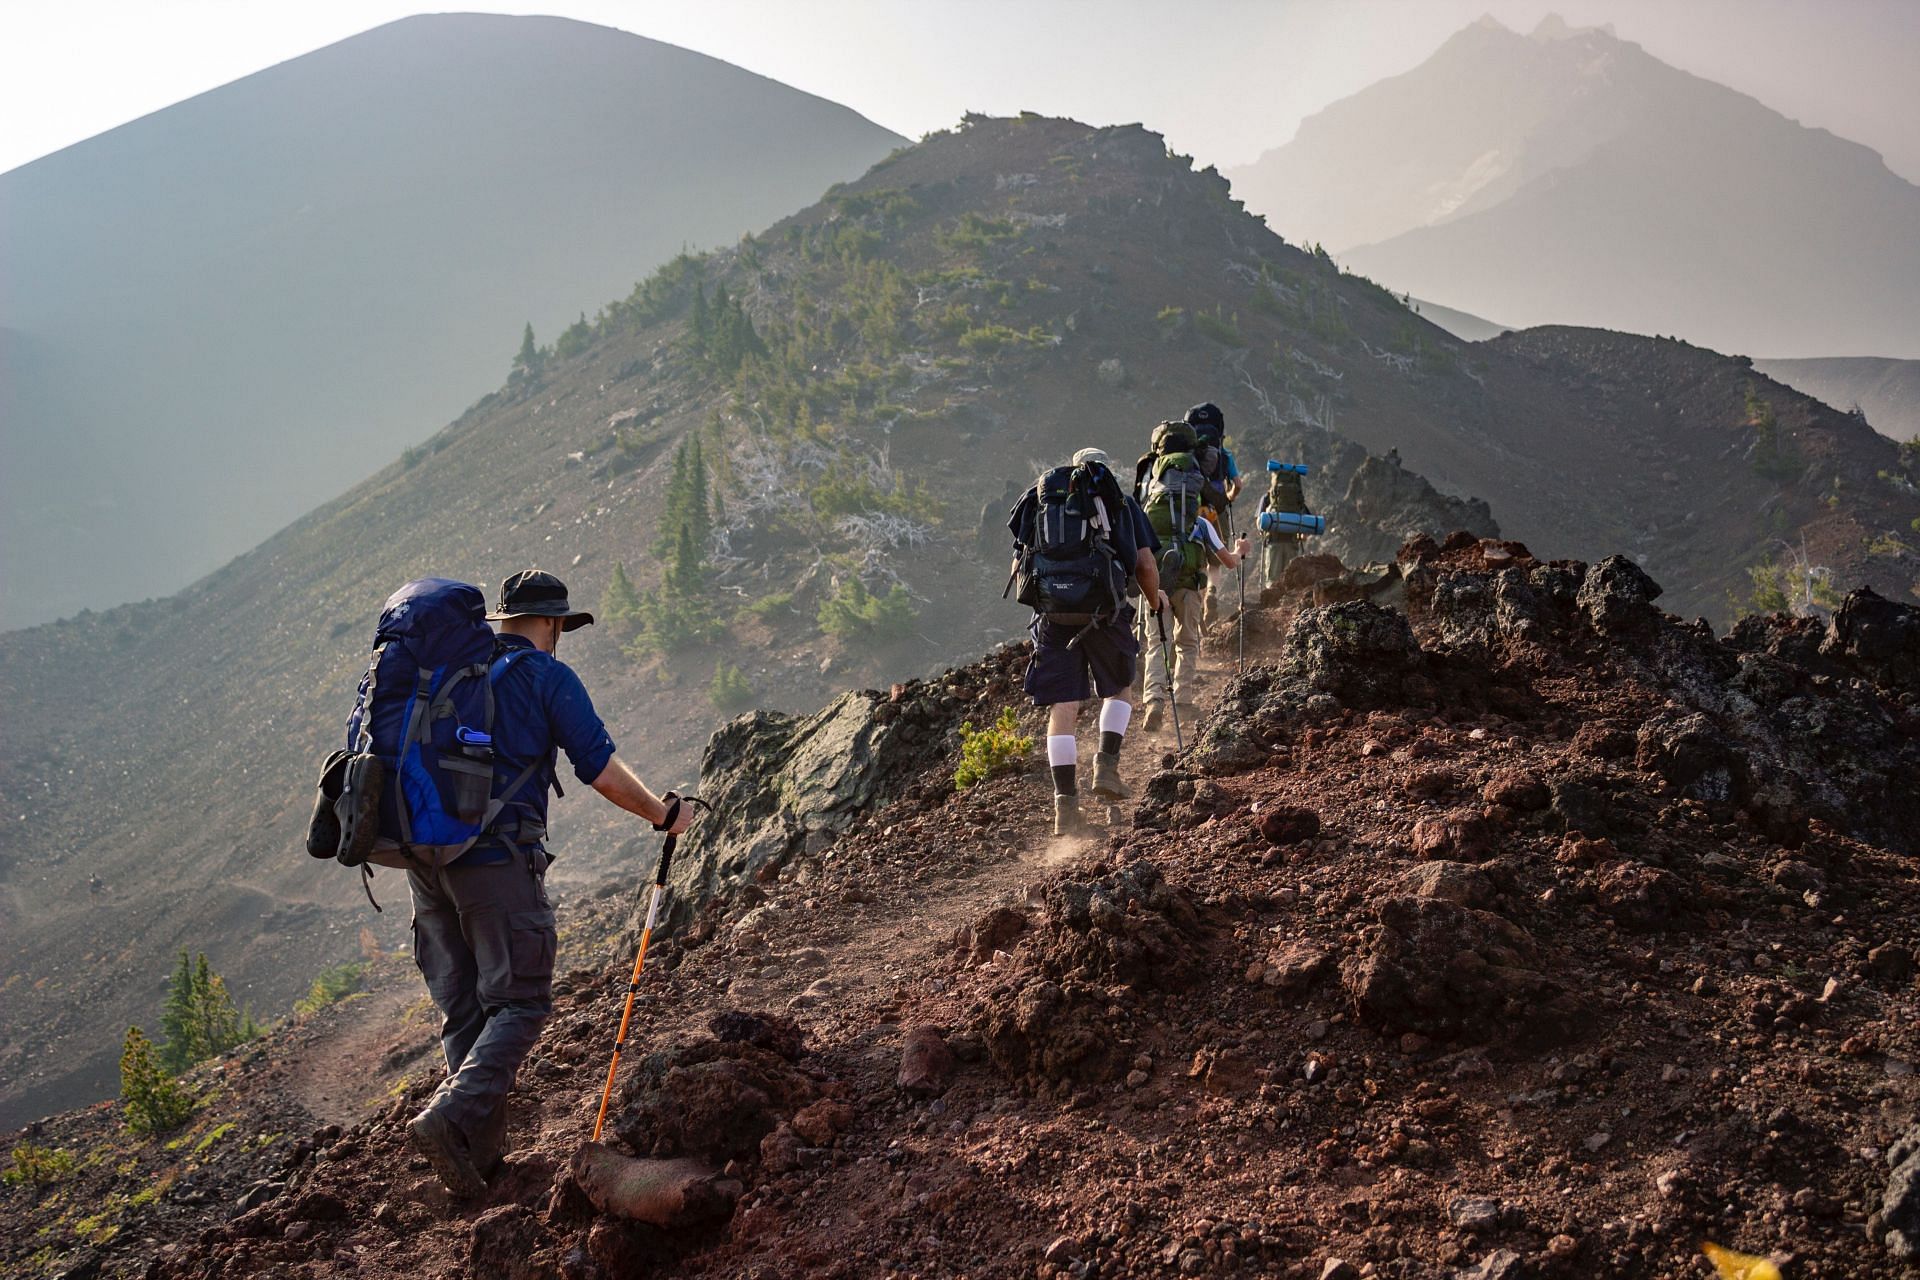 Hiking offers exceptional physical and mental health benefits (Image via Pexels)